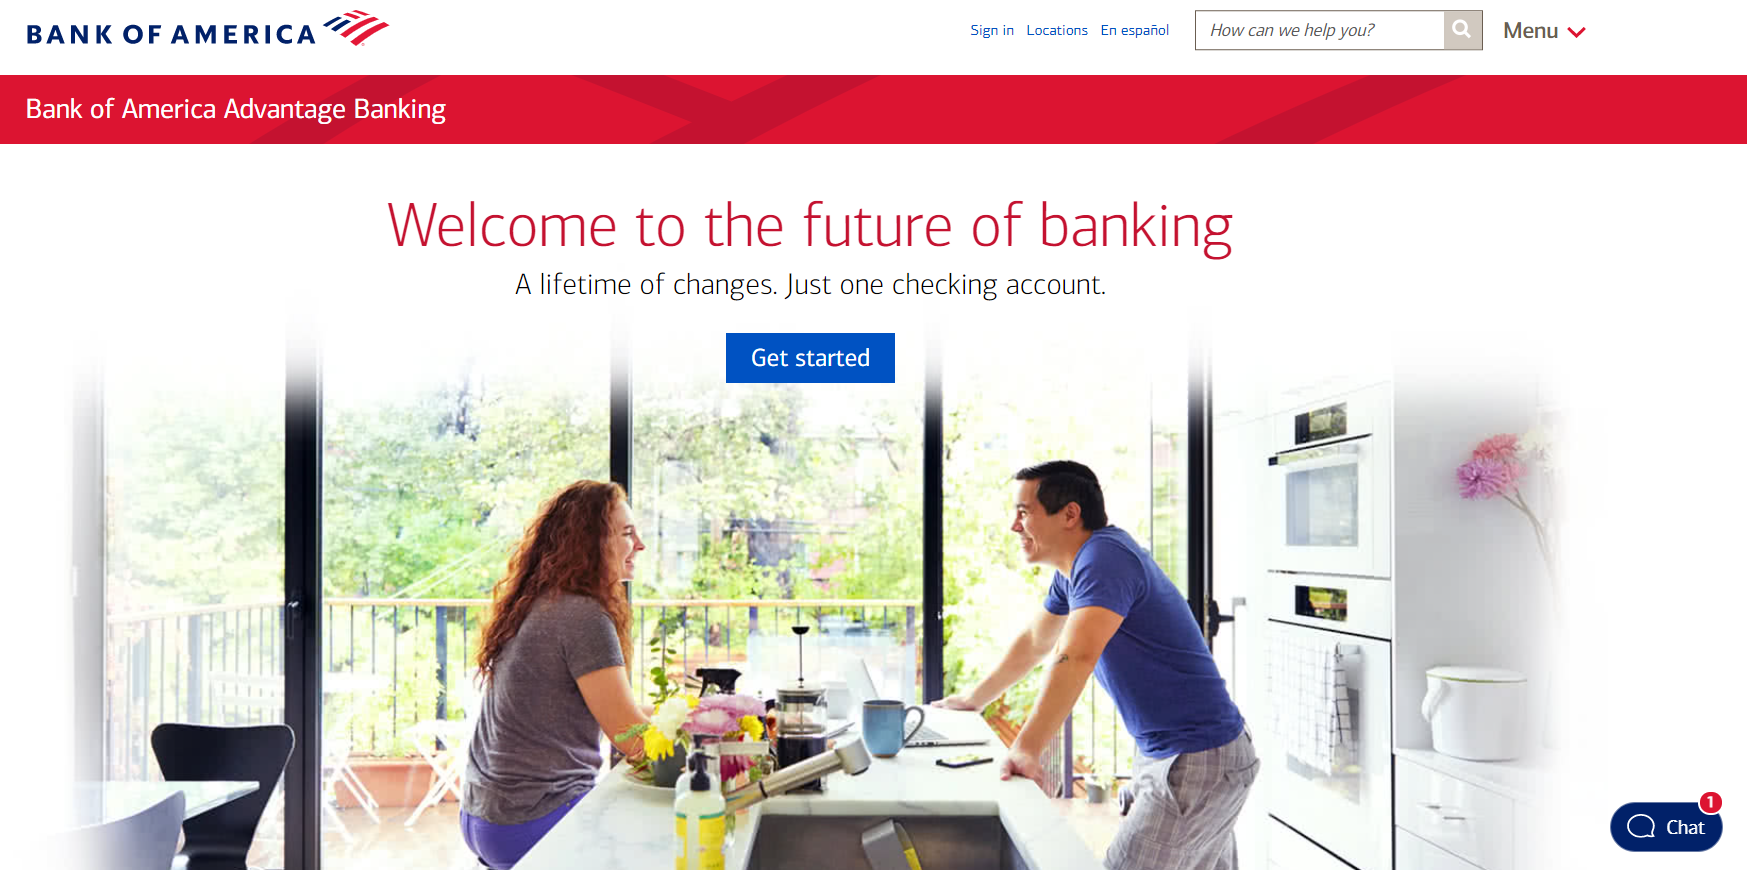 "Bank of America has blue in its color scheme"